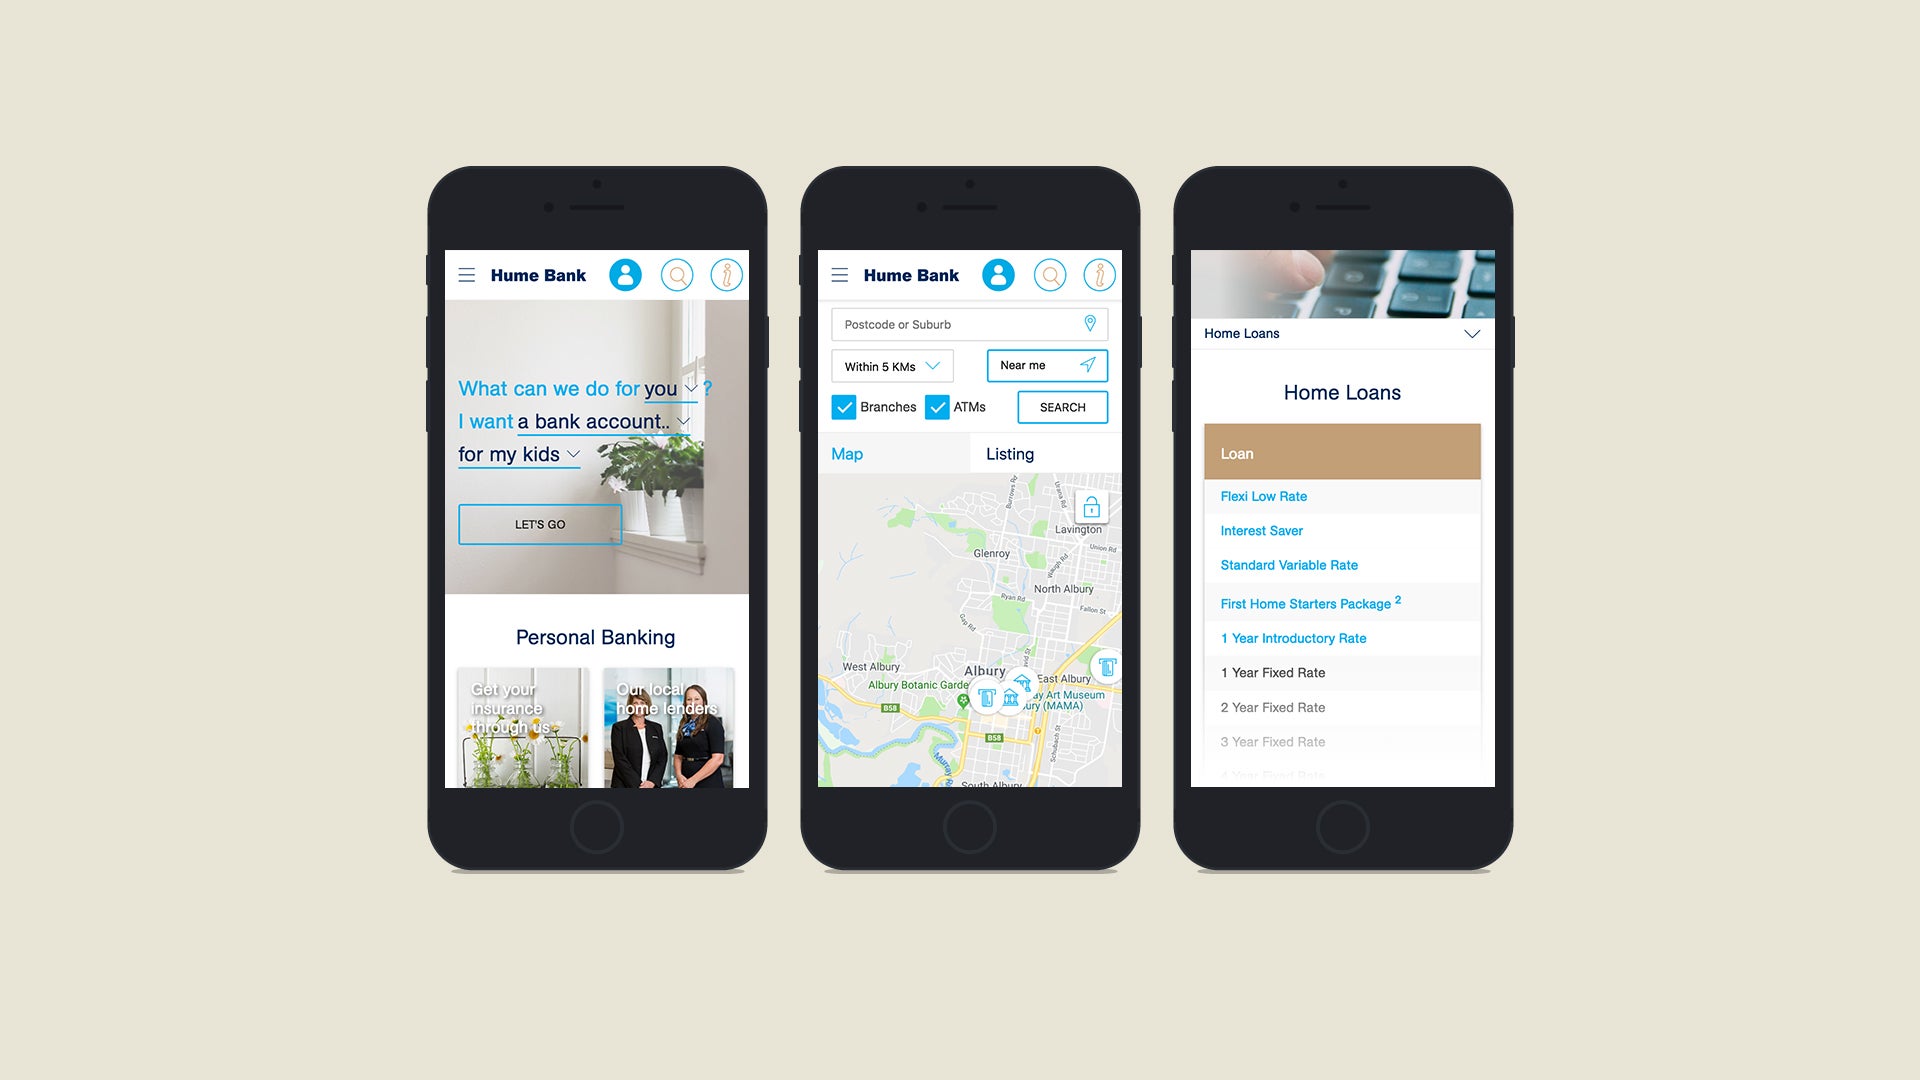 Hume Bank website on a mobile device